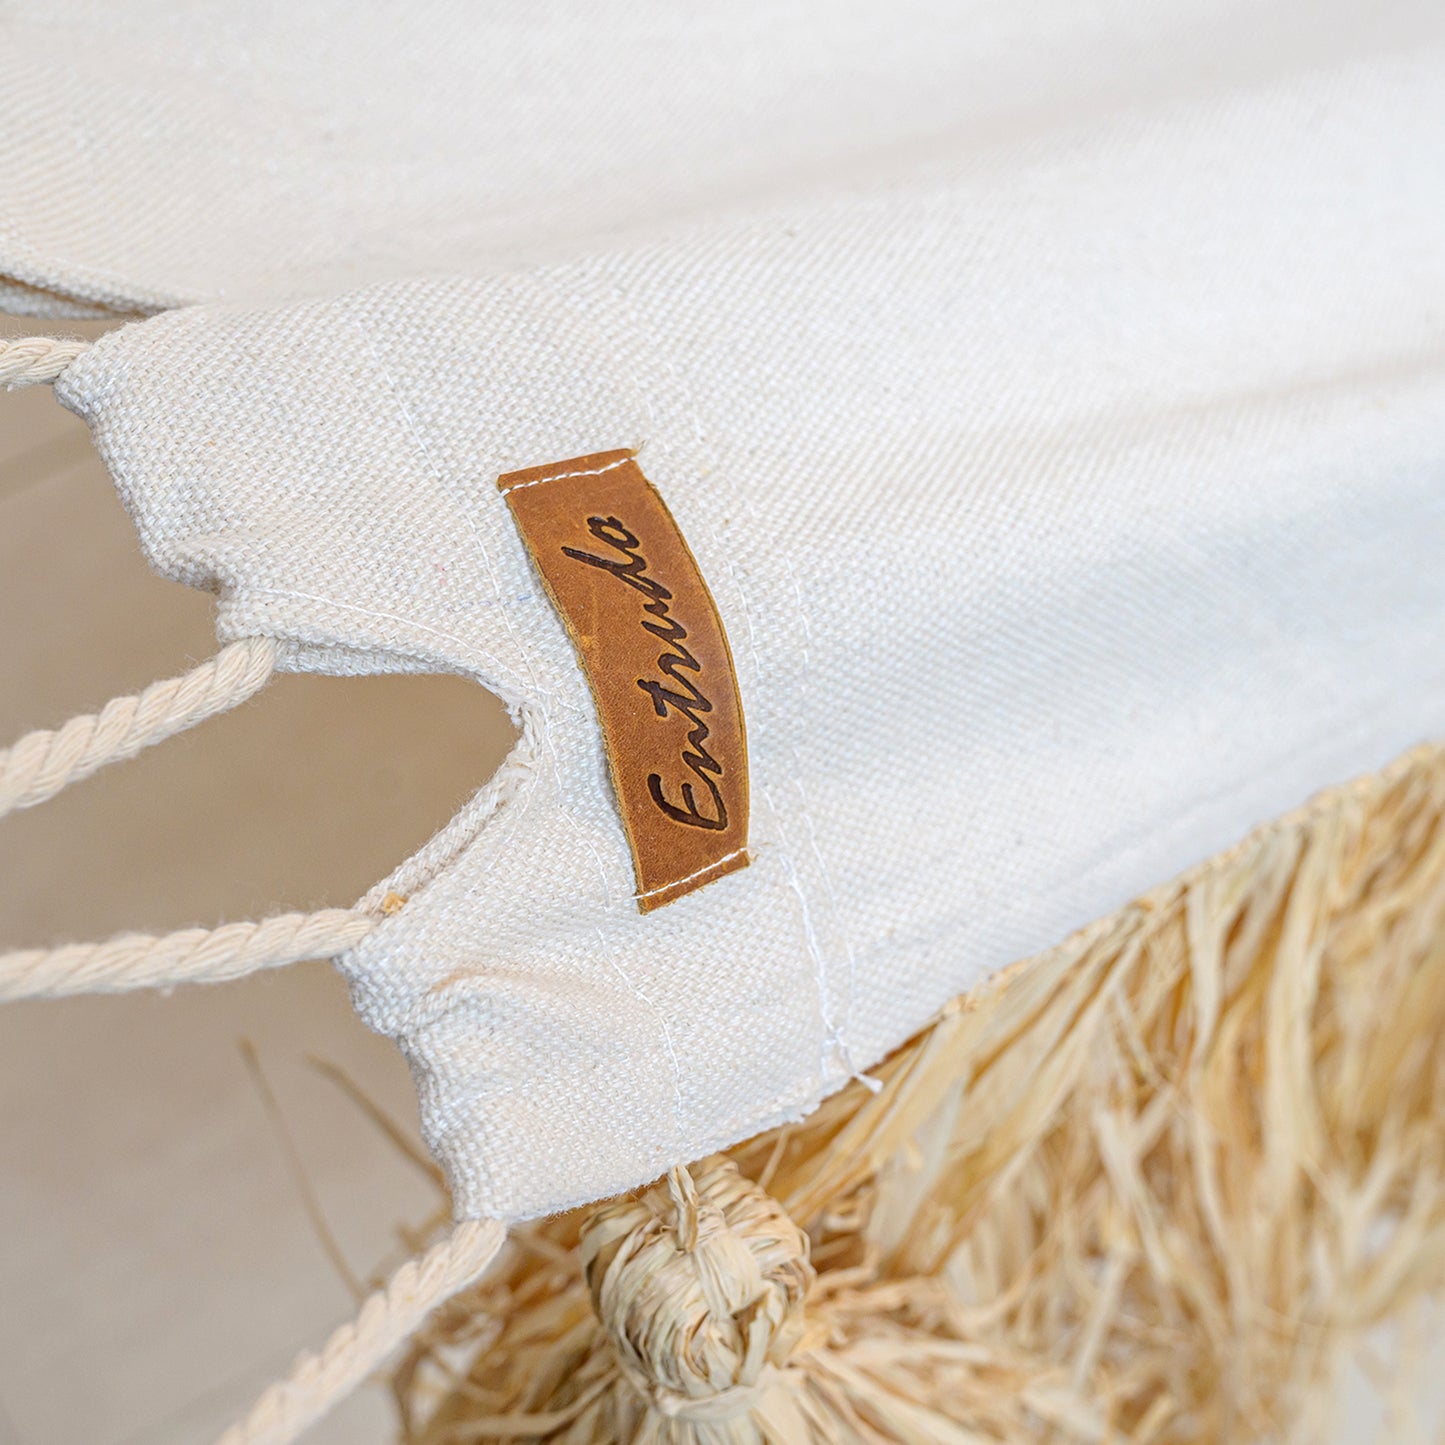 Cambres - garden hammock with handmade raffia fringes and tassels